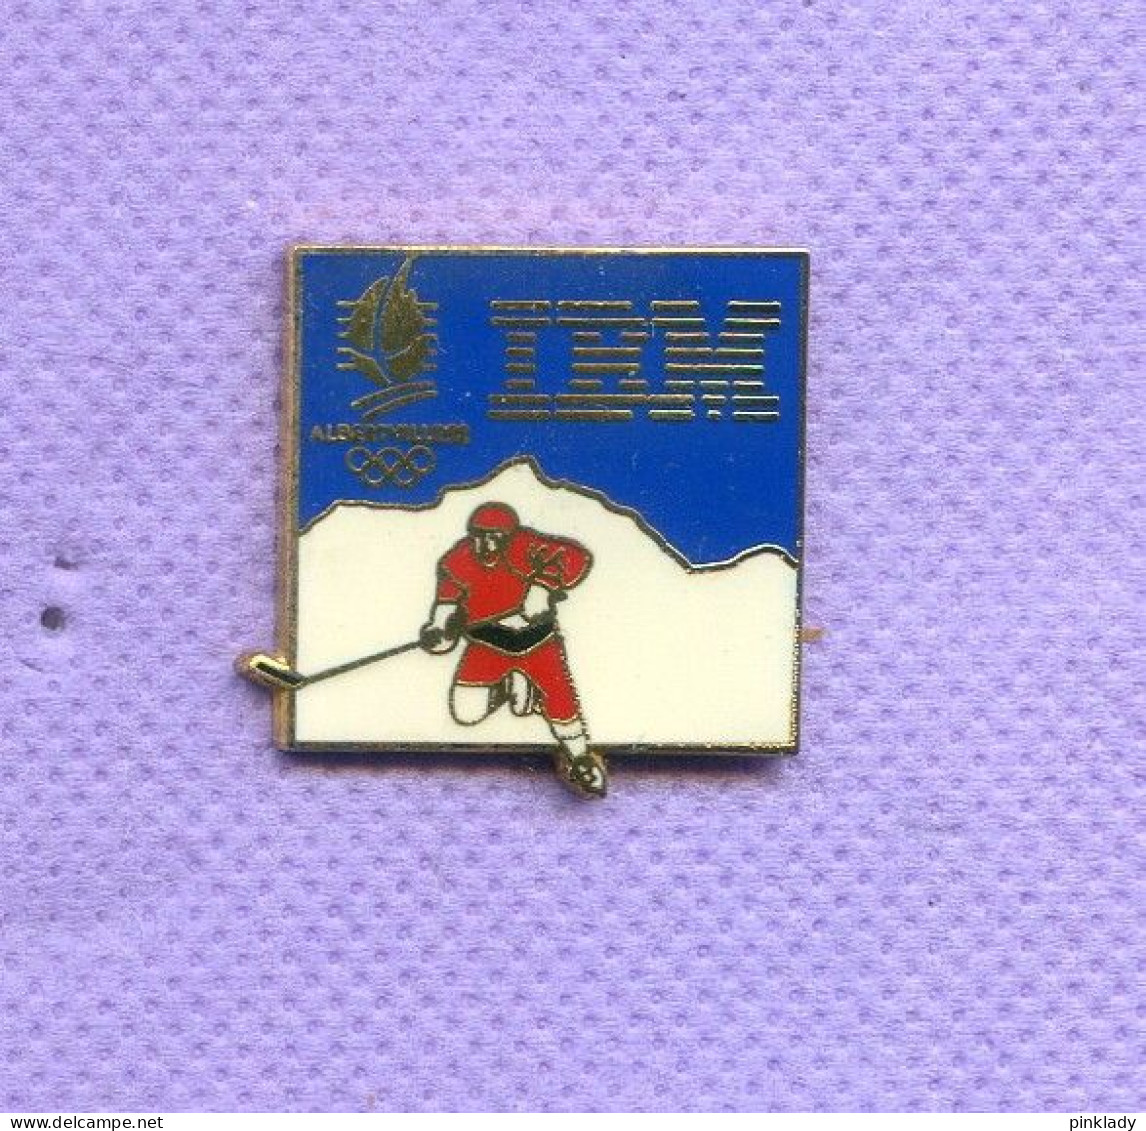 Rare Pins Jeux Olympiques Albertville 1992 Hockey Ibm Ab126 - Olympische Spiele